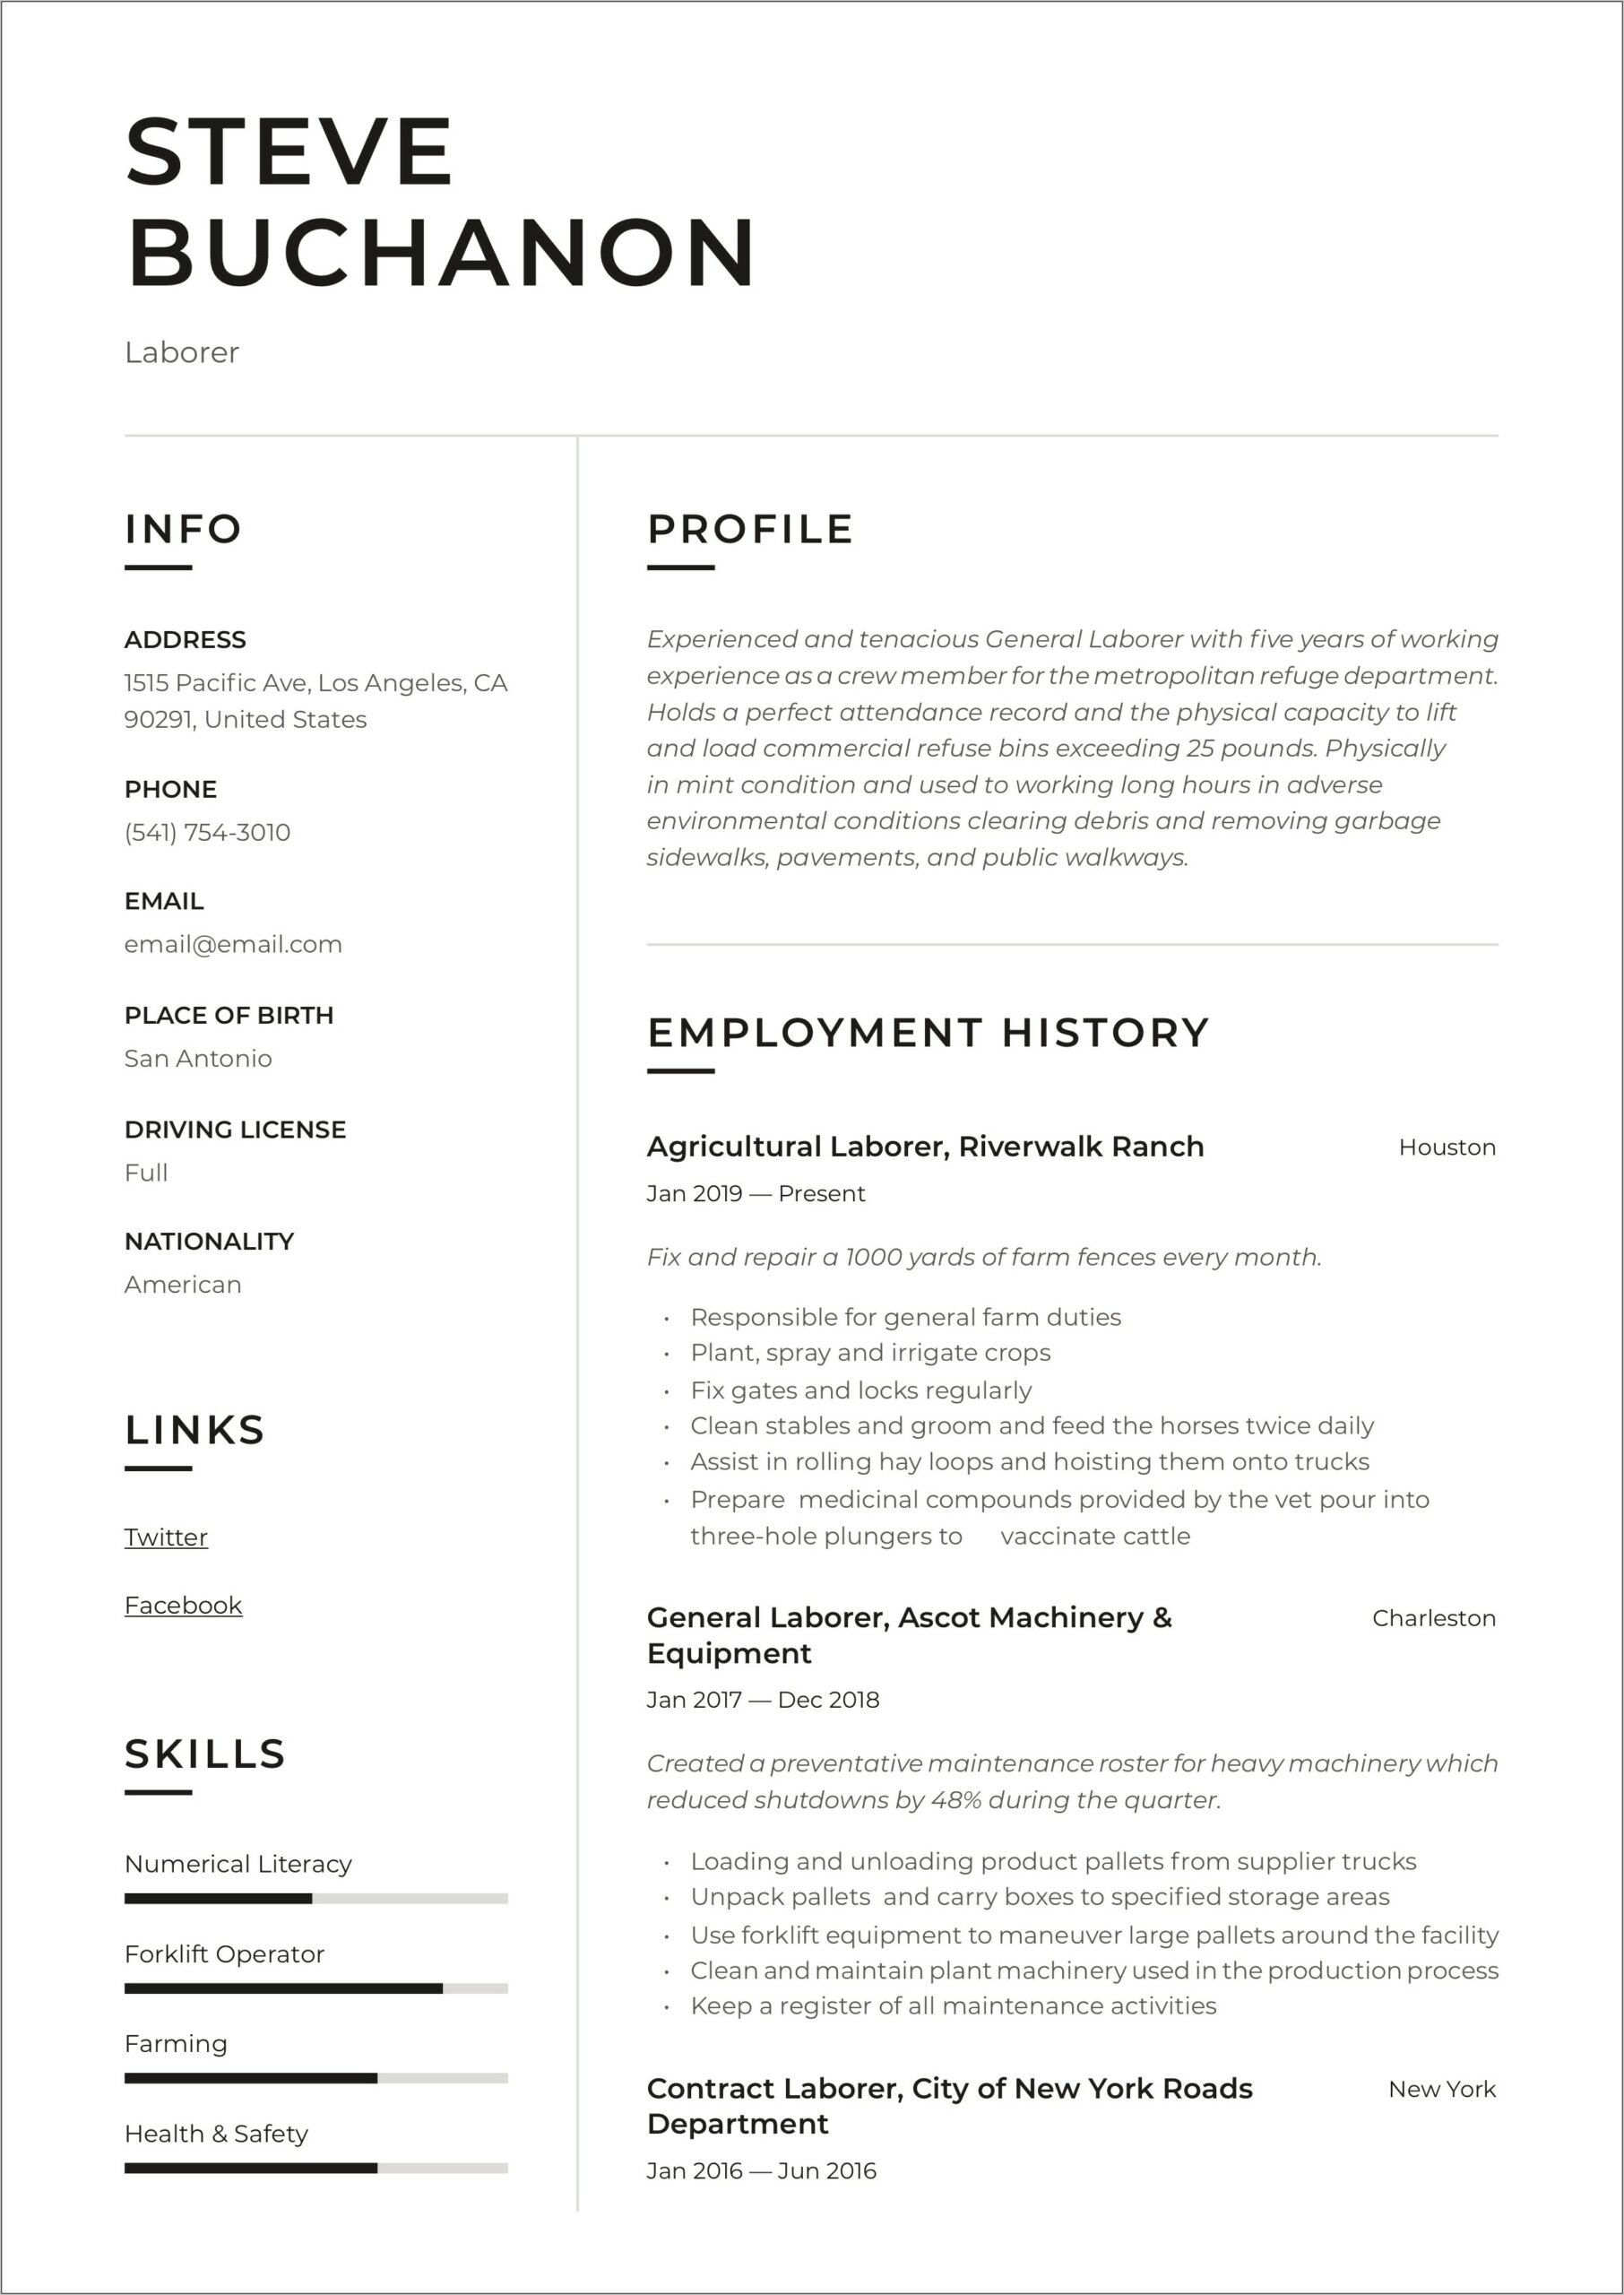 Example Resume For Unskilled Worker